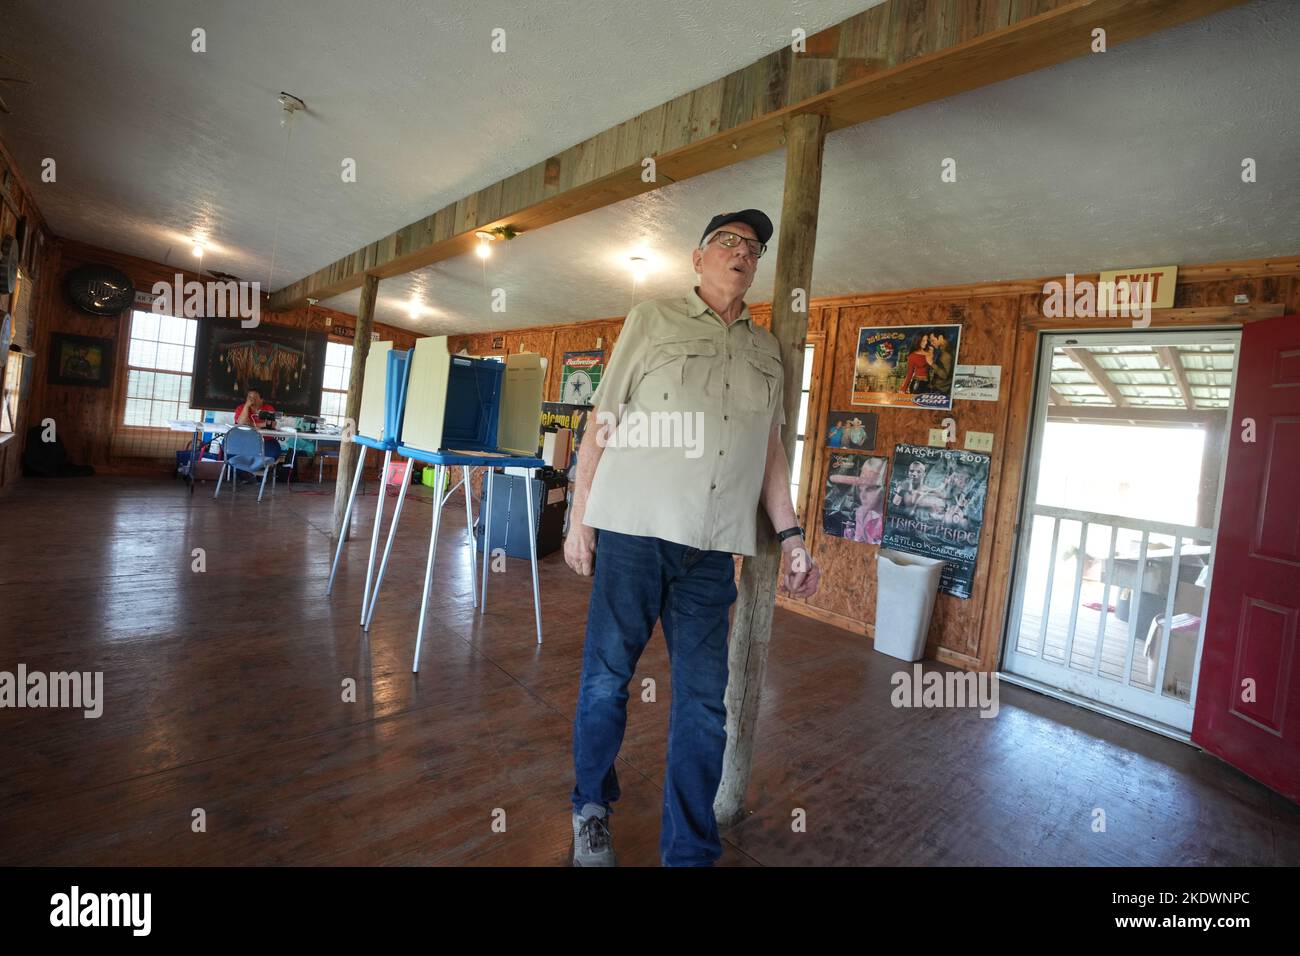 Live Oak County Texas USA, November 8 2022: Election Judge PHILLIP STORM waits in the old barbecue joint Ray's outside of Alice, Texas, for voters to arrive during the midterm elections in rural south Texas. The business has been closed about 15 years and is used regularly as a rural polling place. Credit: Bob Daemmrich/Alamy Live News Stock Photo